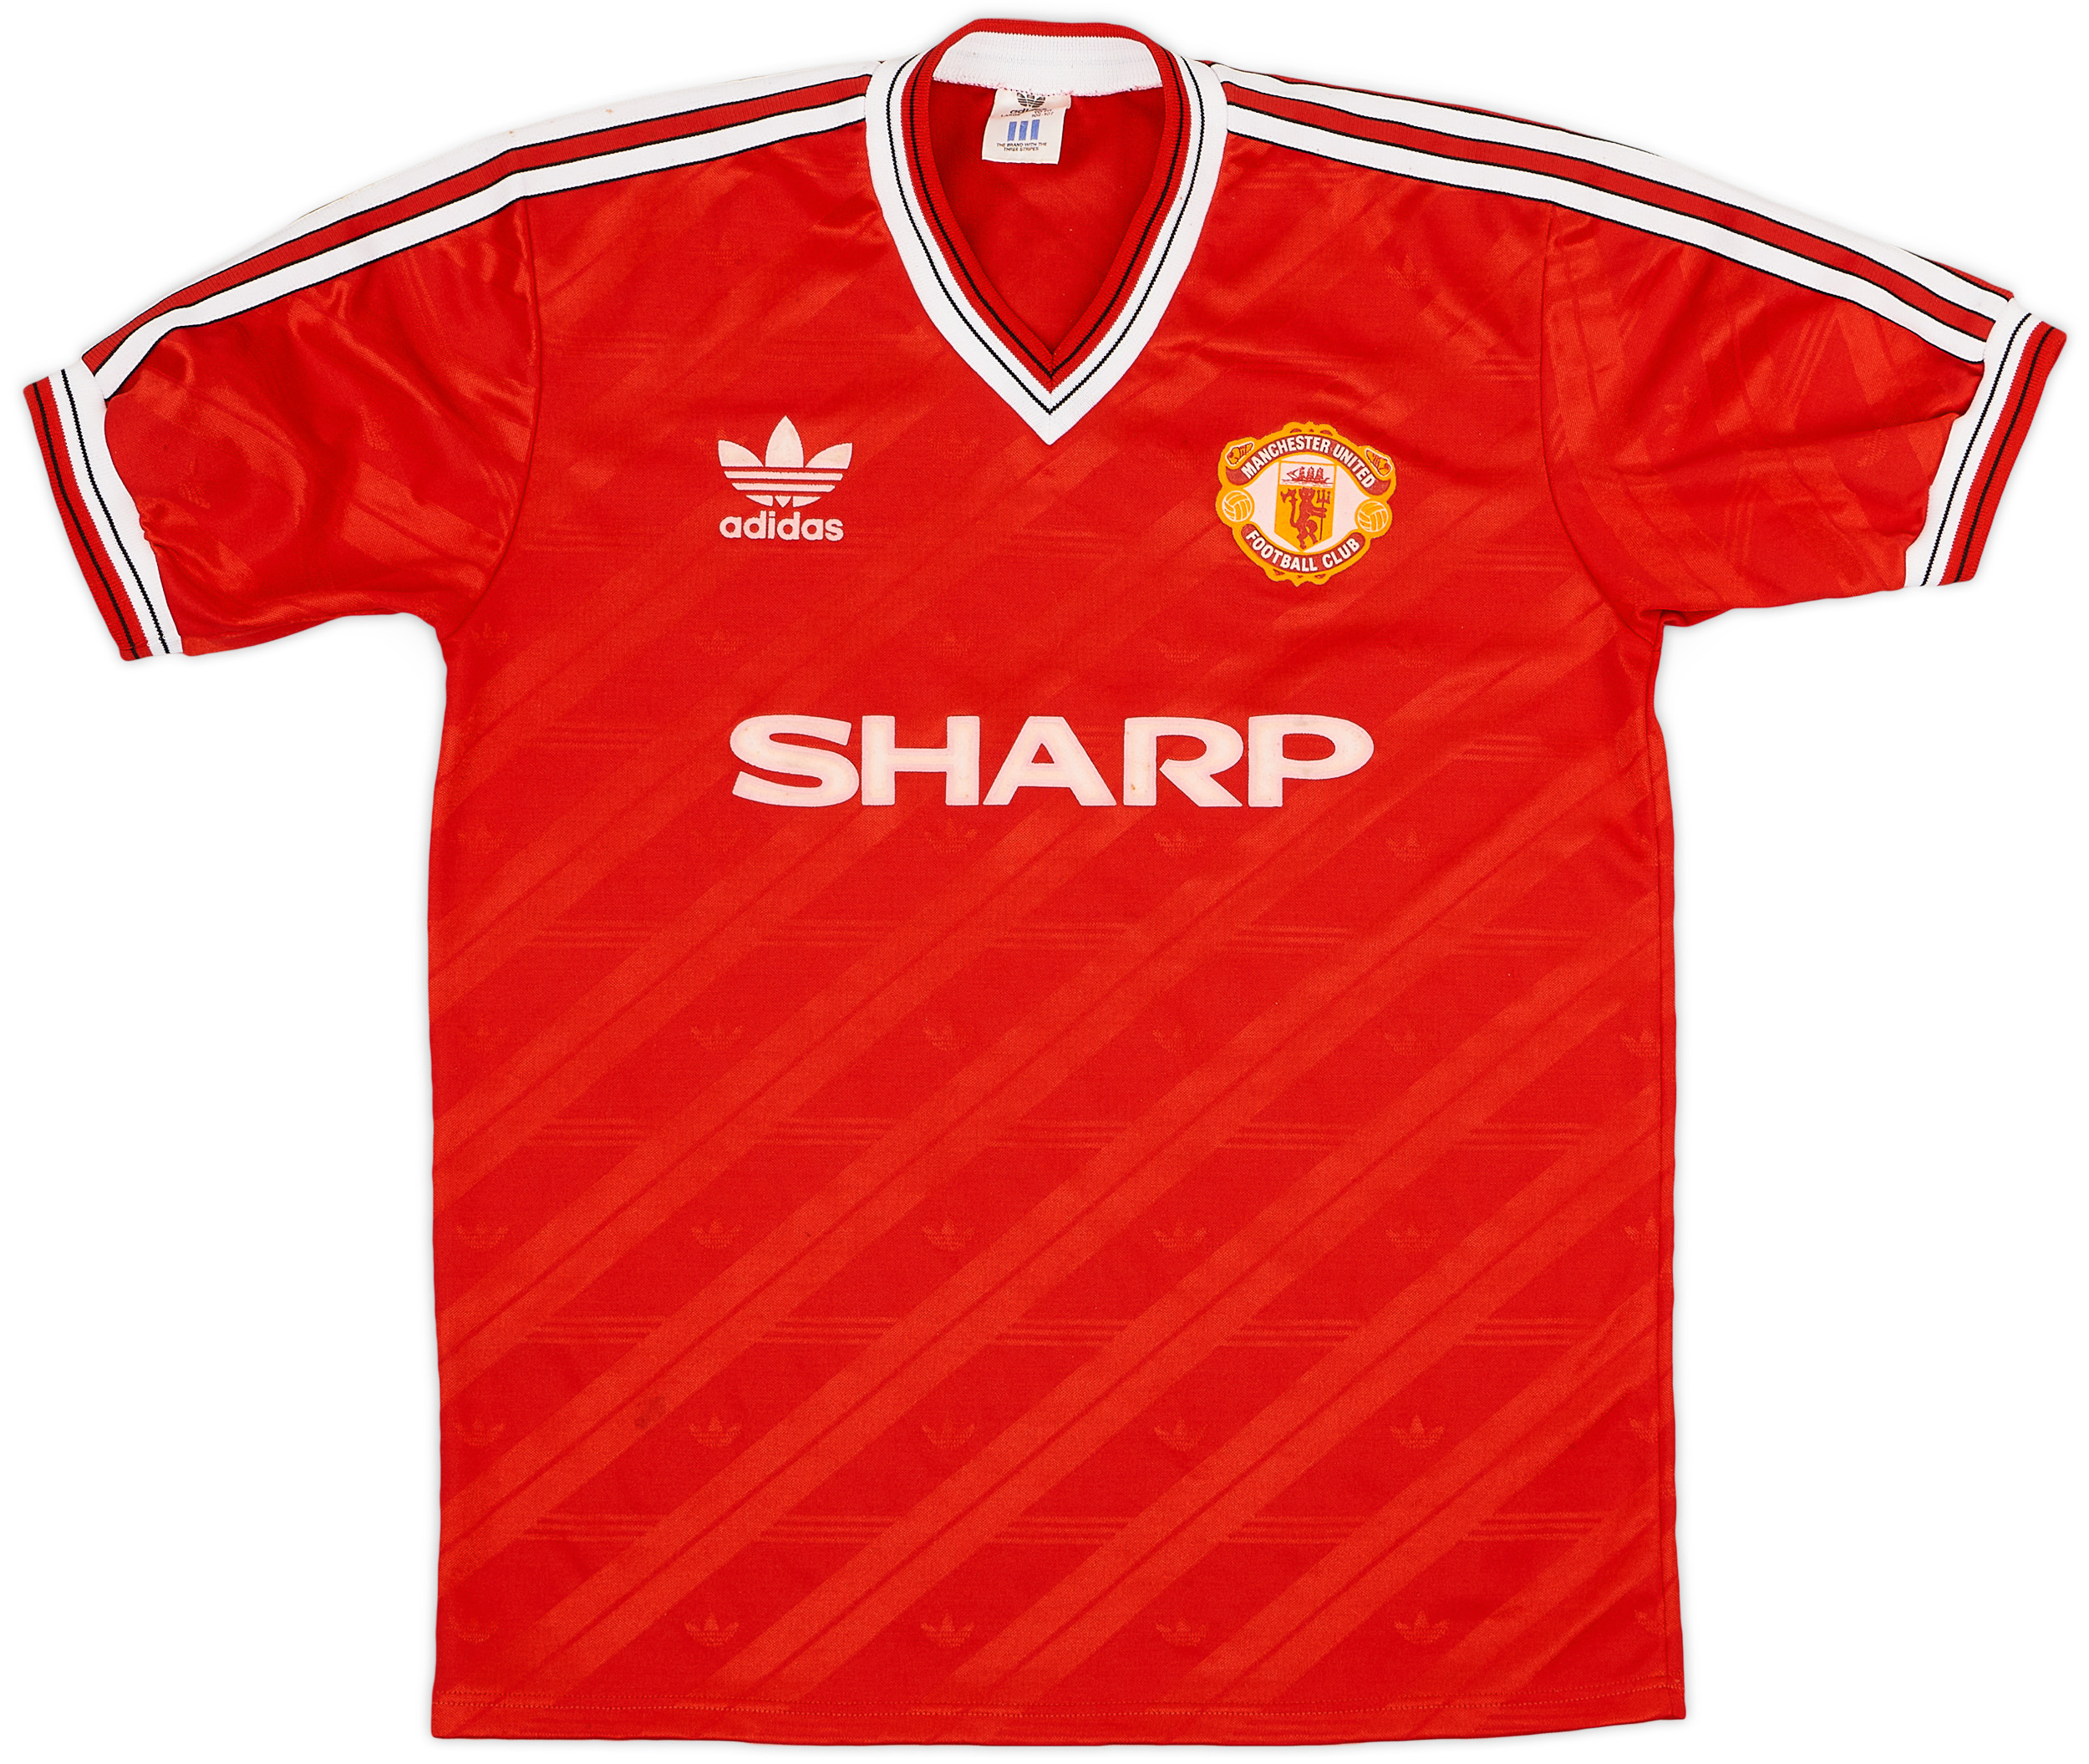 1986-88 Manchester United Home Shirt - 9/10 - ()